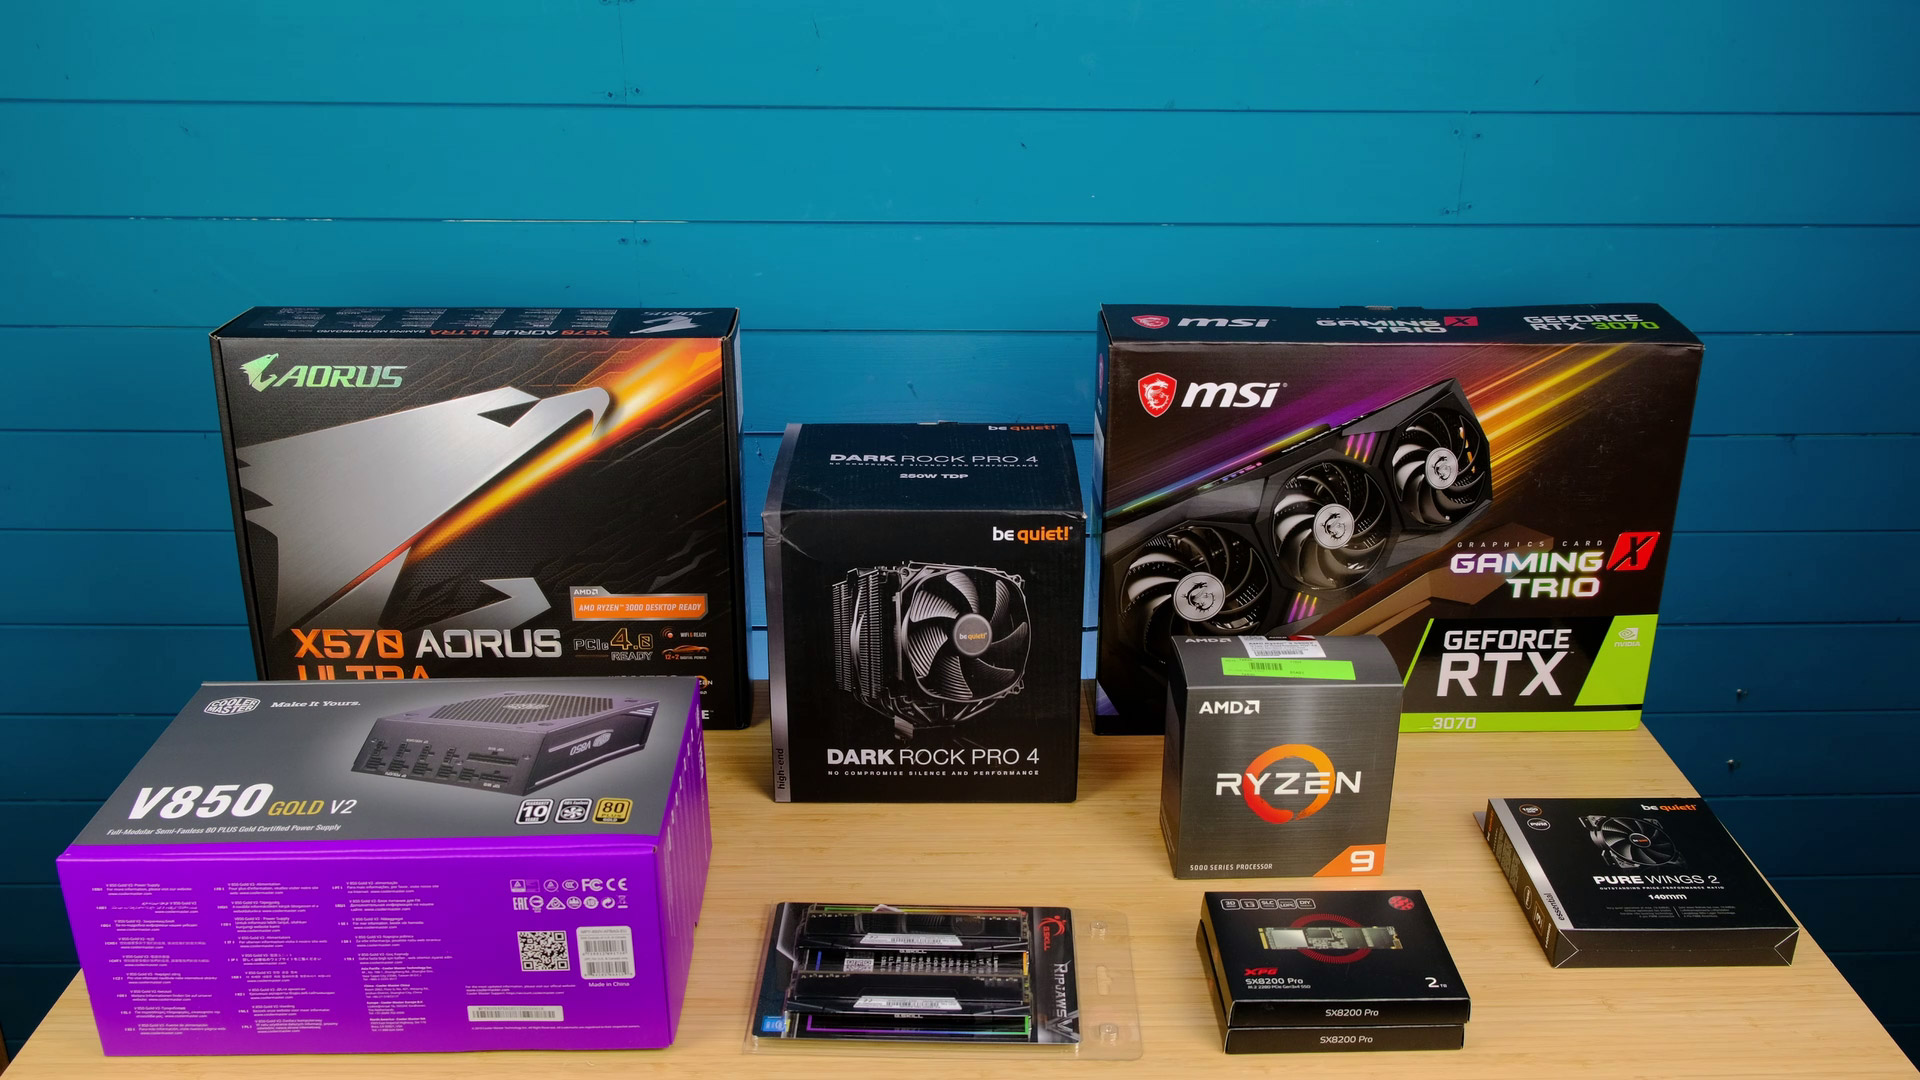 Kalksten tro betale Ryzen 9 5900x + RTX 3070 - SERIOUS PC Build 2021 • Epic Game Tech - PC  Builds, Hardware unboxing and How-to Guides